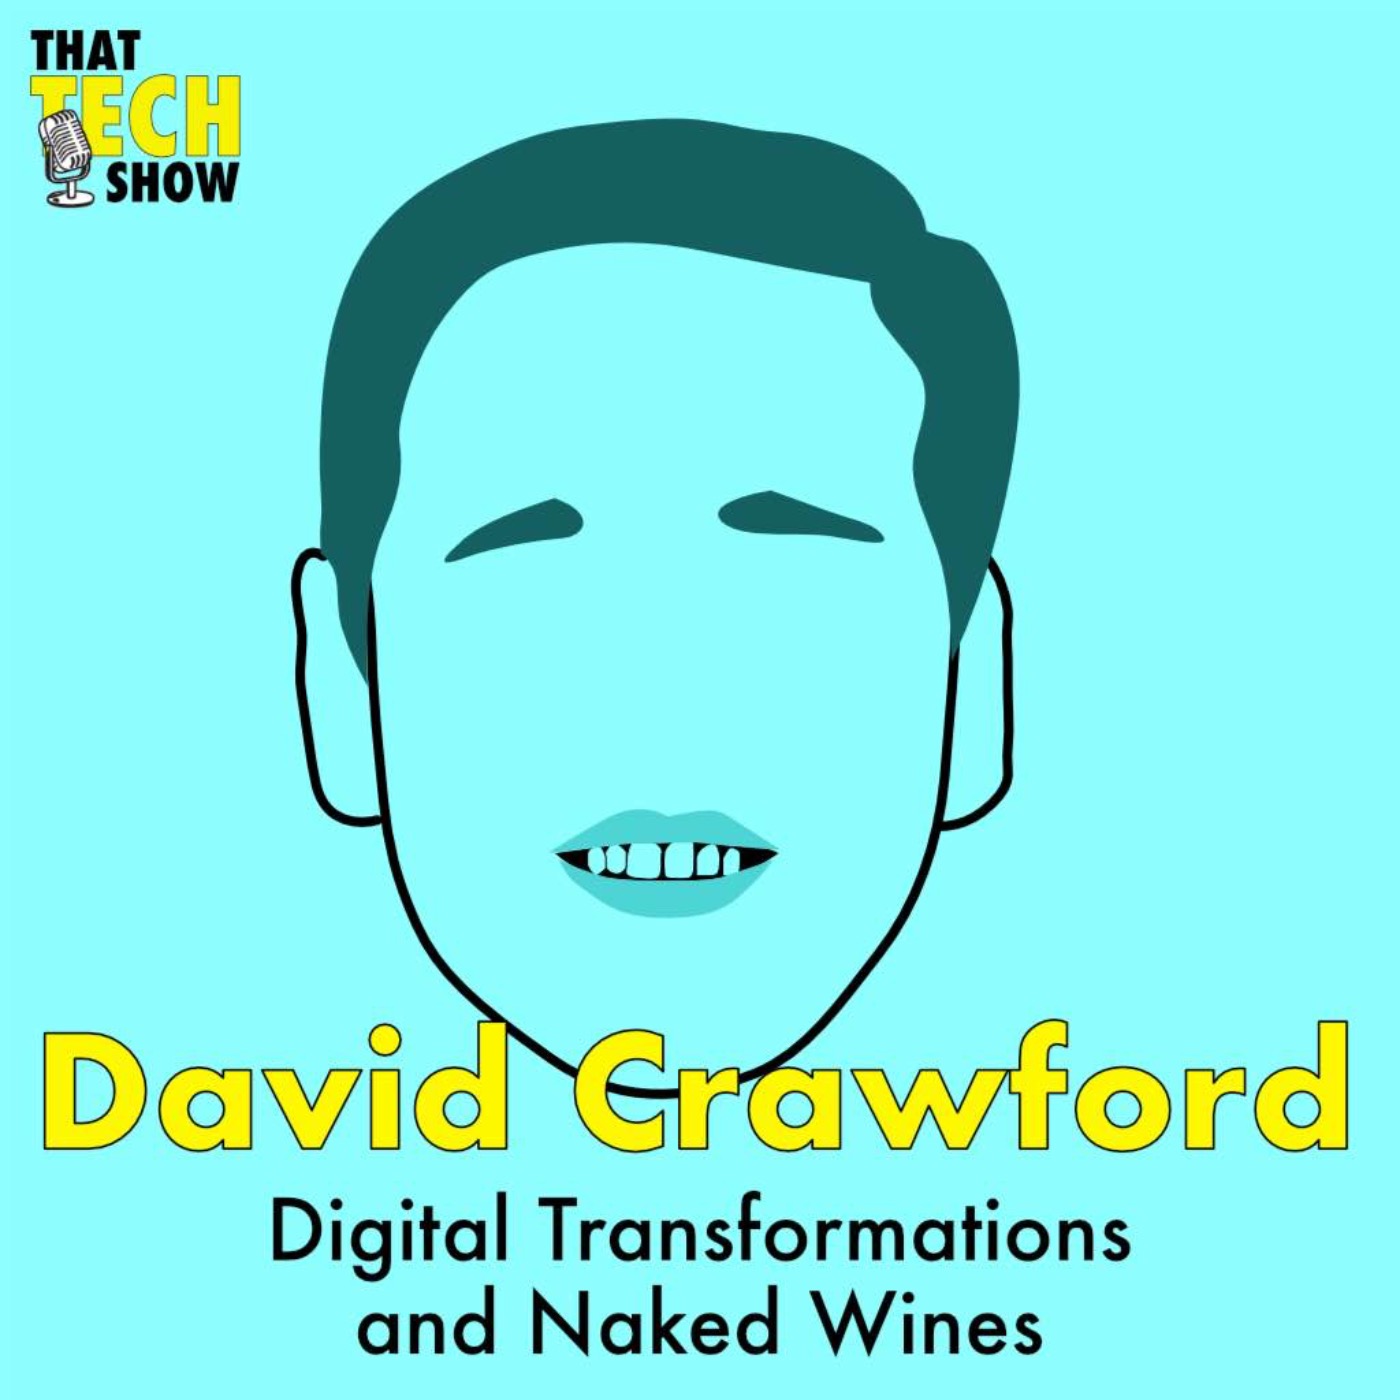 Episode 34 - Digital Transformations and Naked Wines with David Crawford